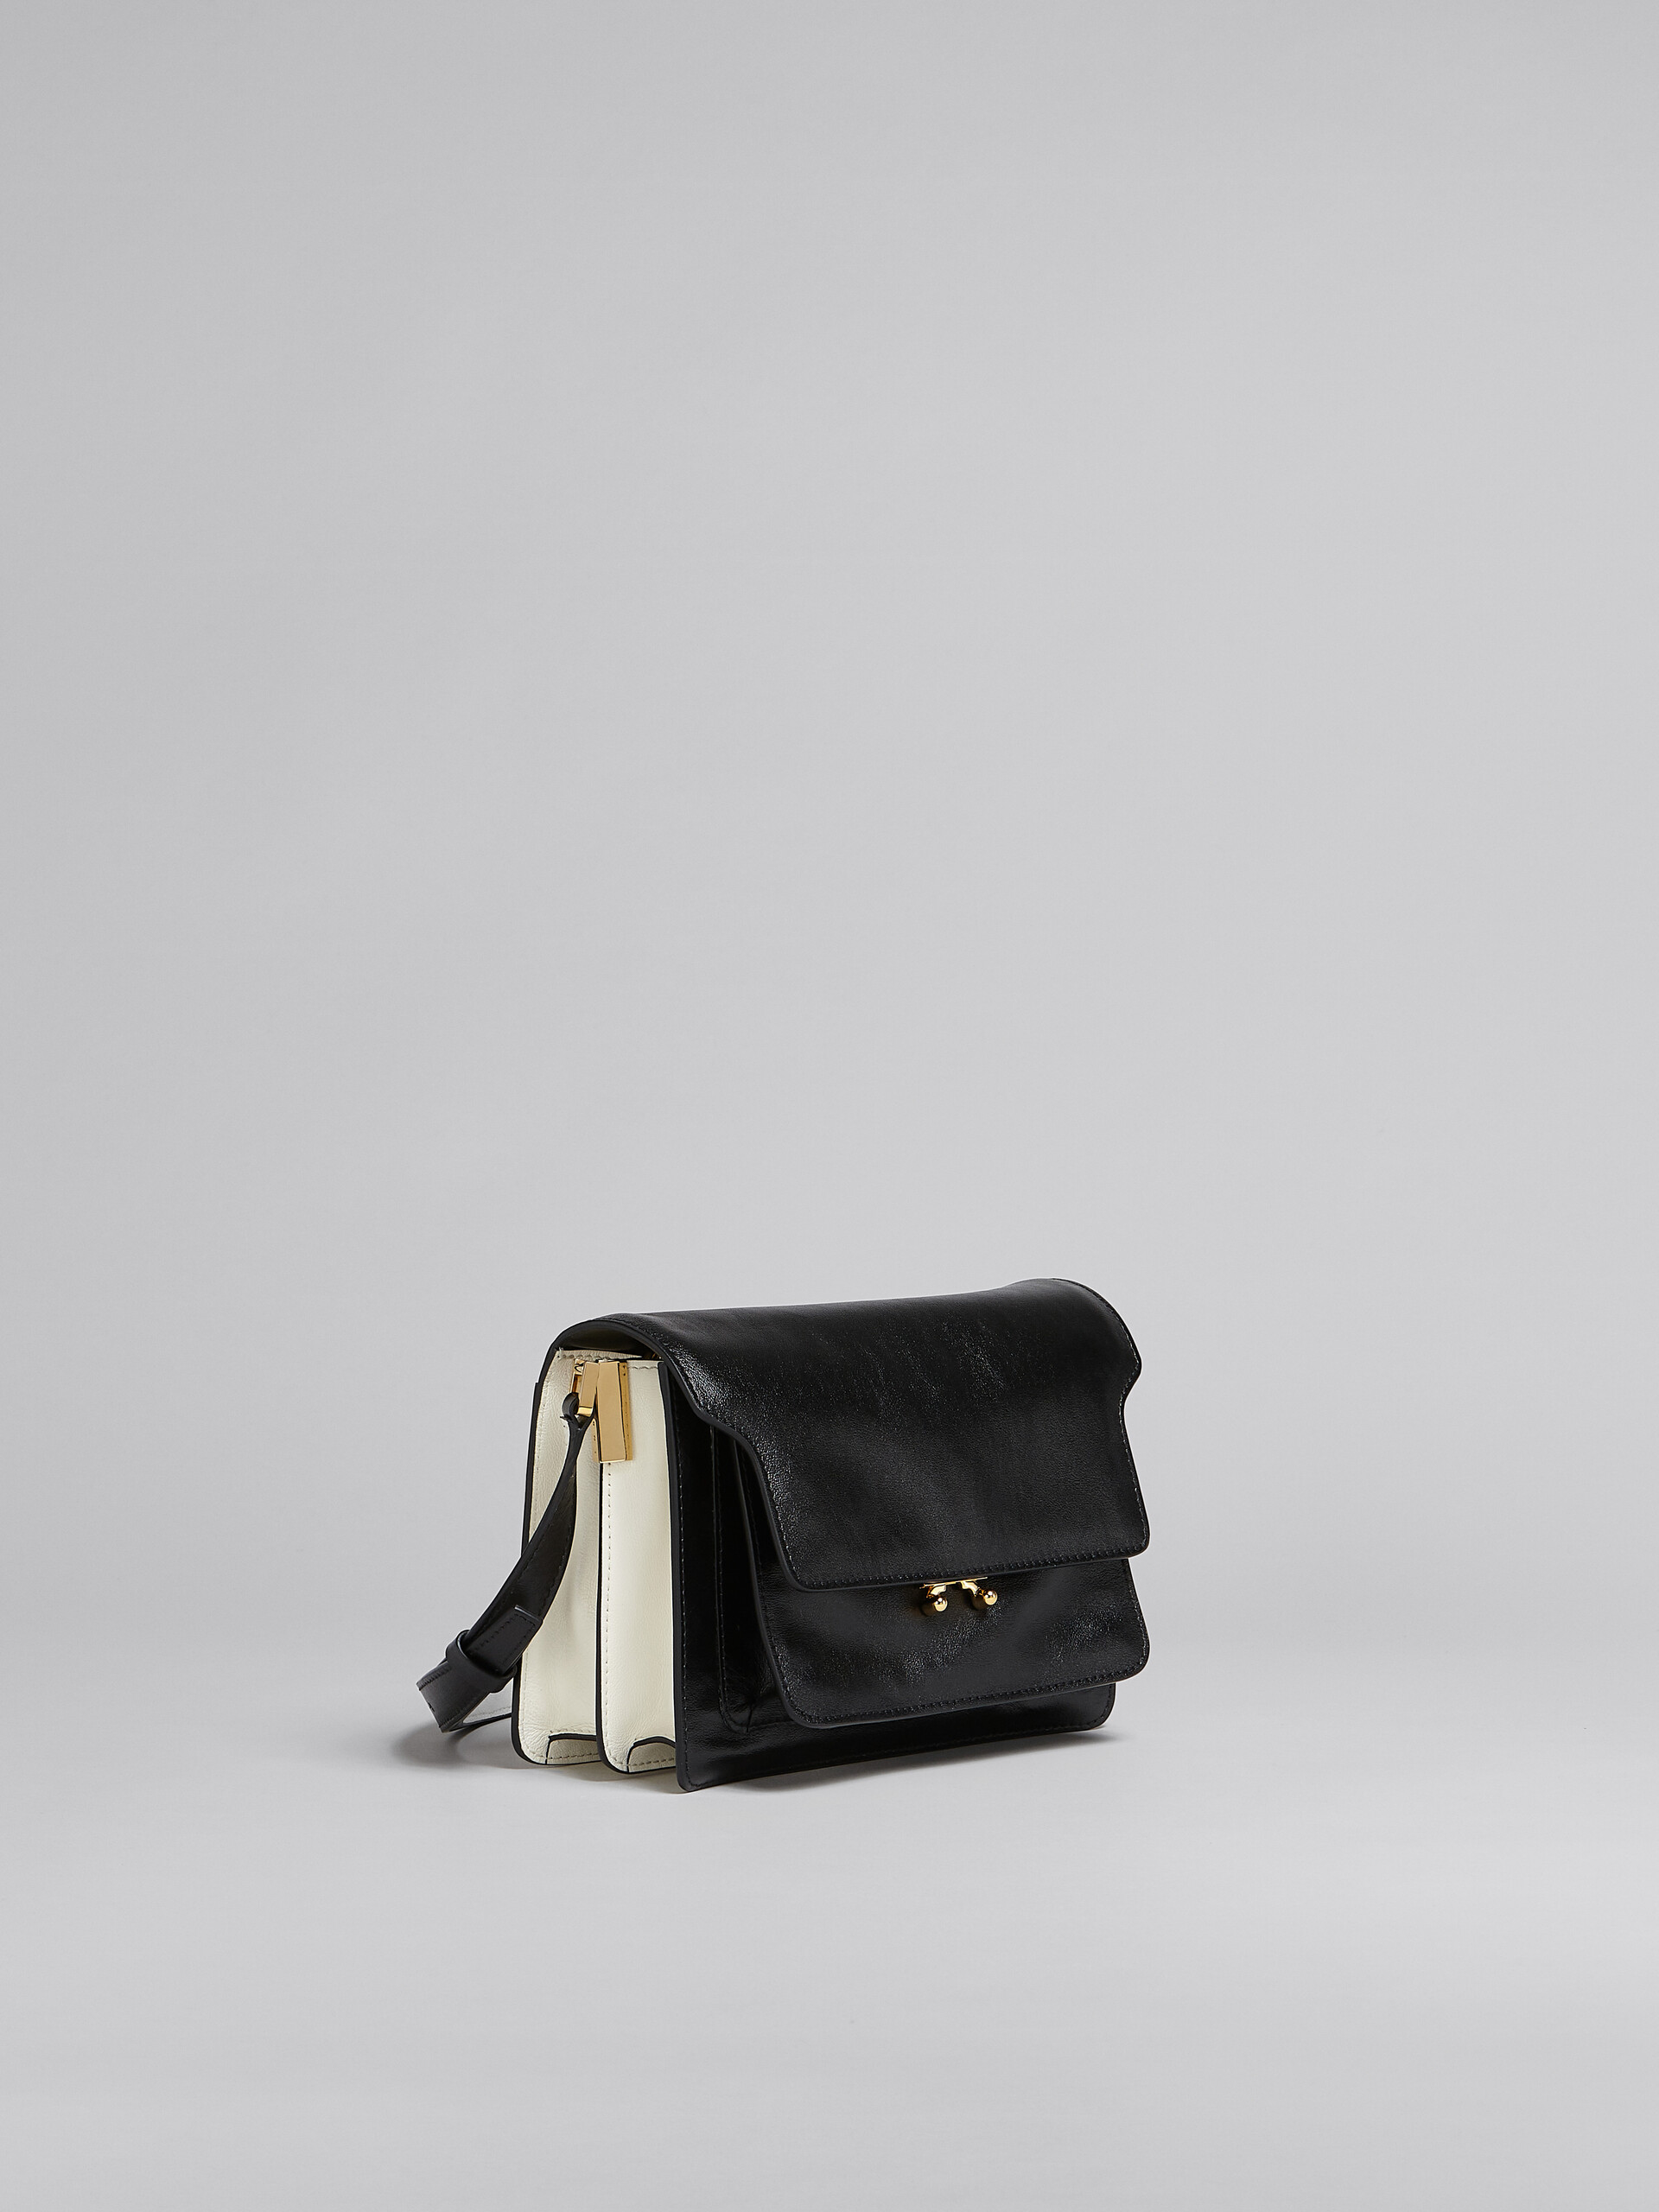 Trunk Soft Medium Bag in black and white leather - Shoulder Bags - Image 6